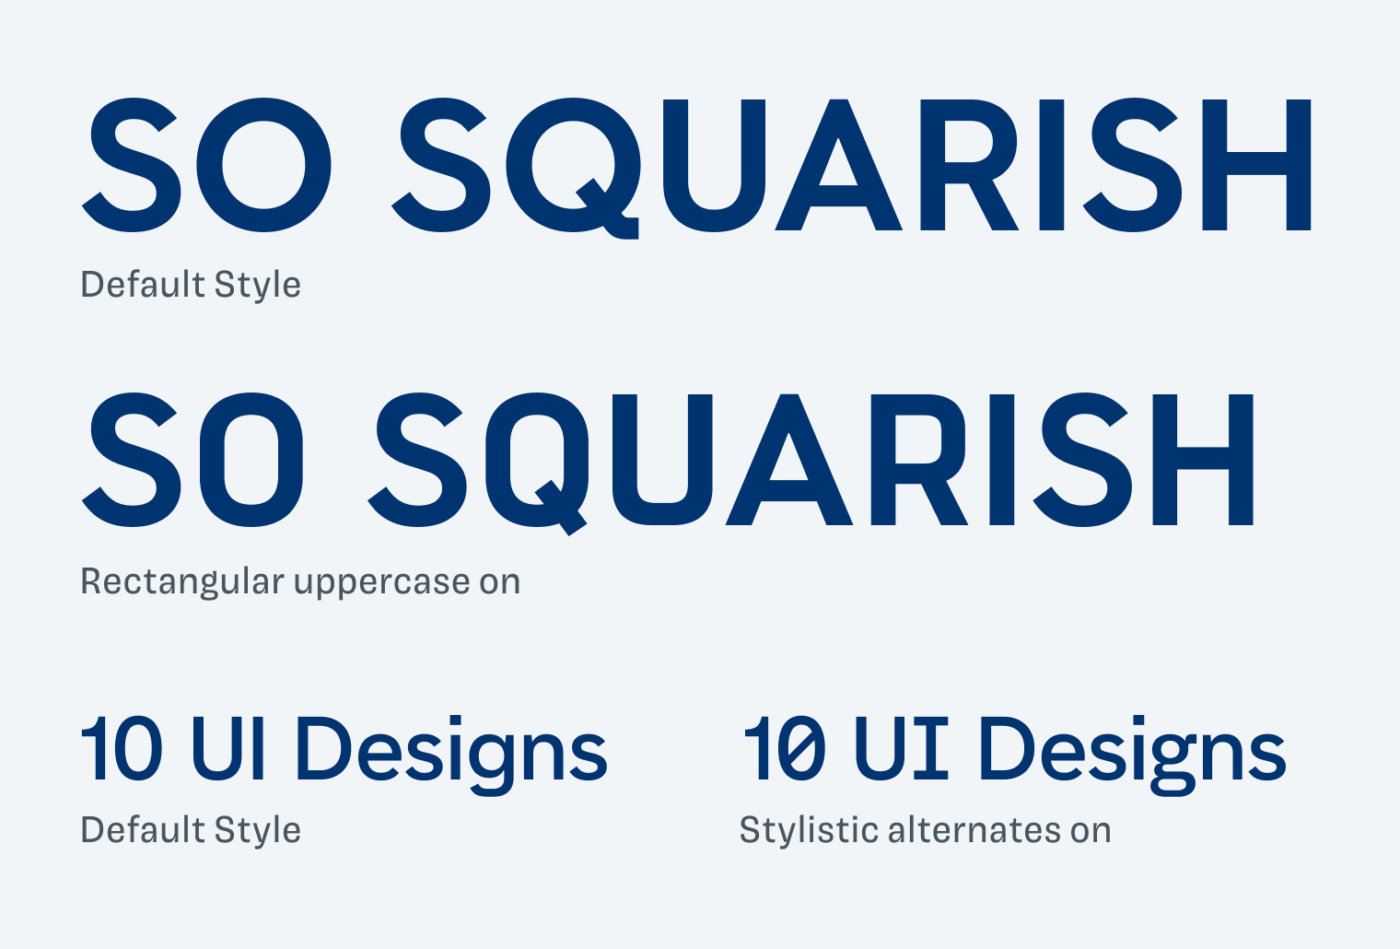 “So squarish” in default and rectangular uppercase styling. “10 UI Designs“ in default style and with stylistic alternates for better differentiation.